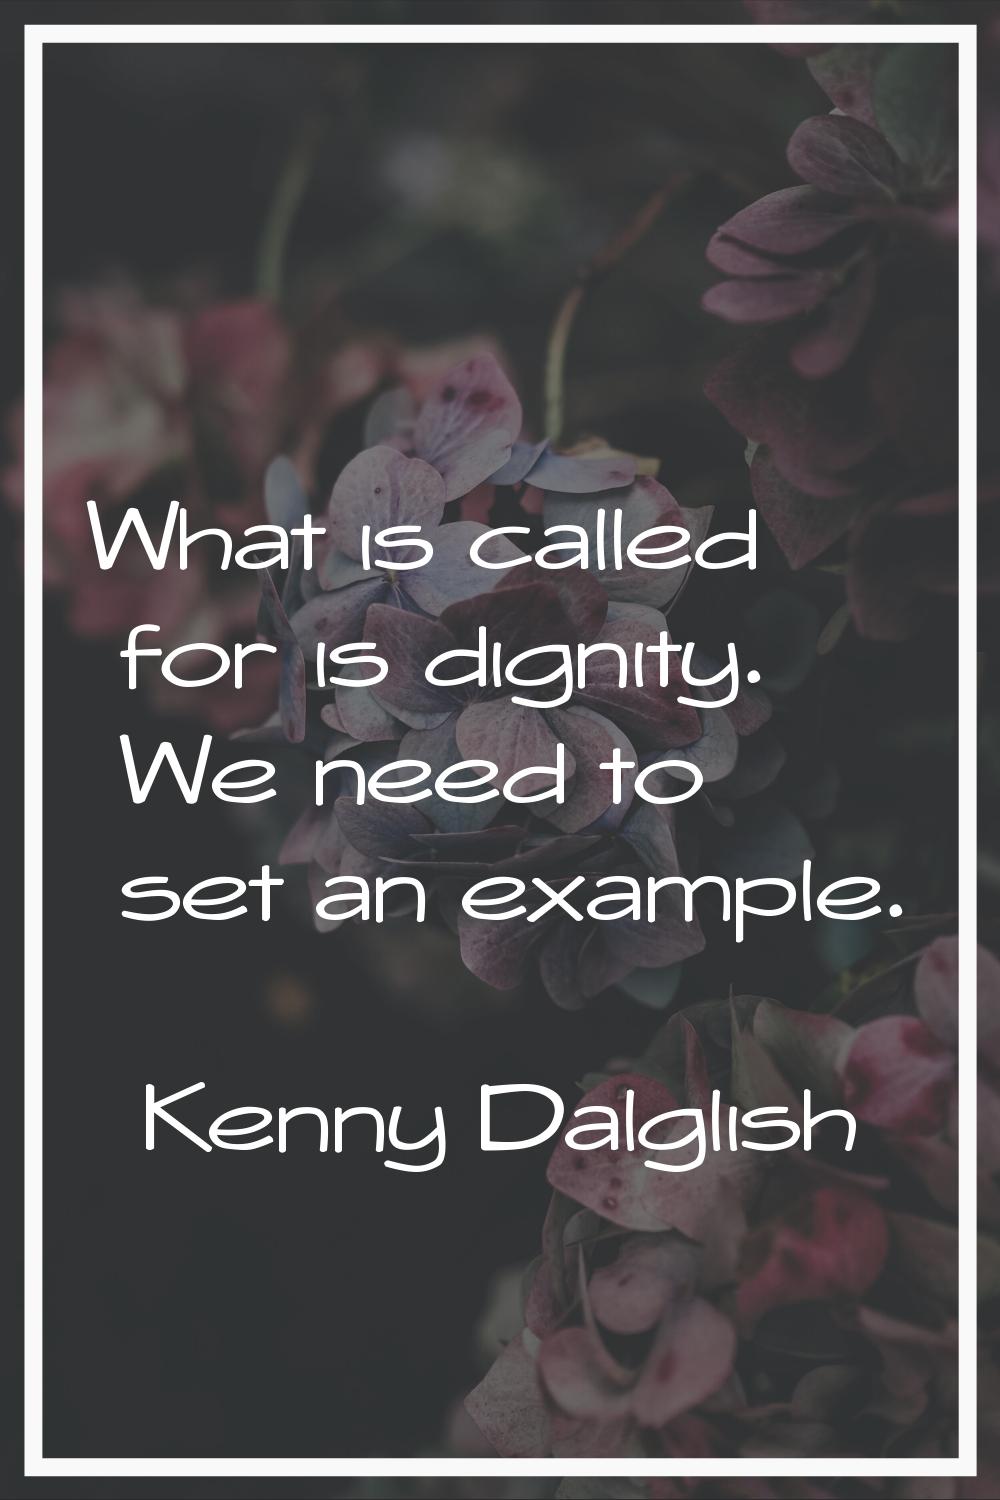 What is called for is dignity. We need to set an example.